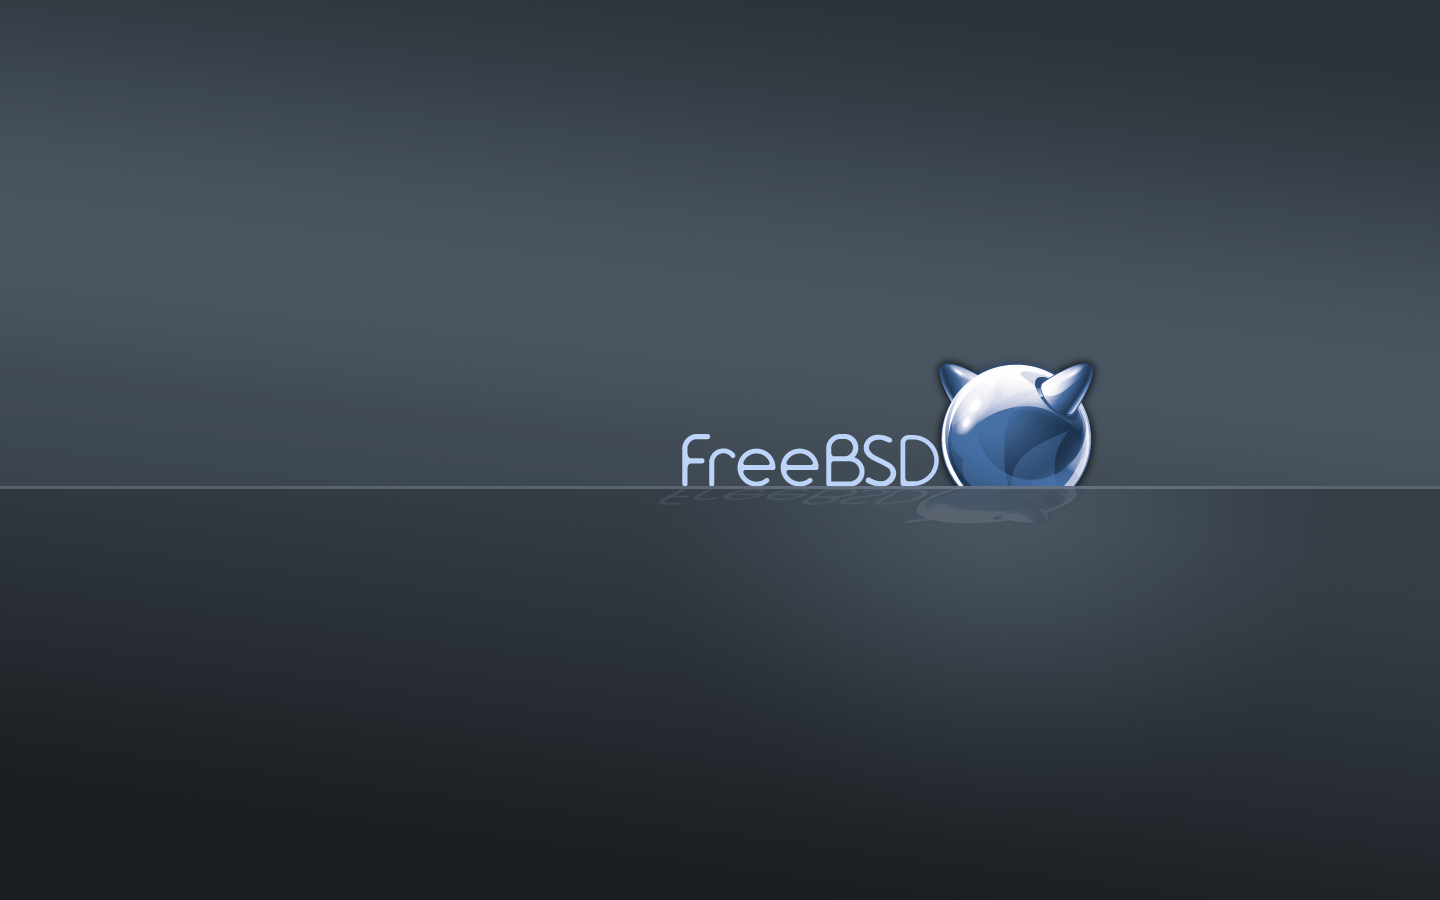 FreeBSD Image Gallery